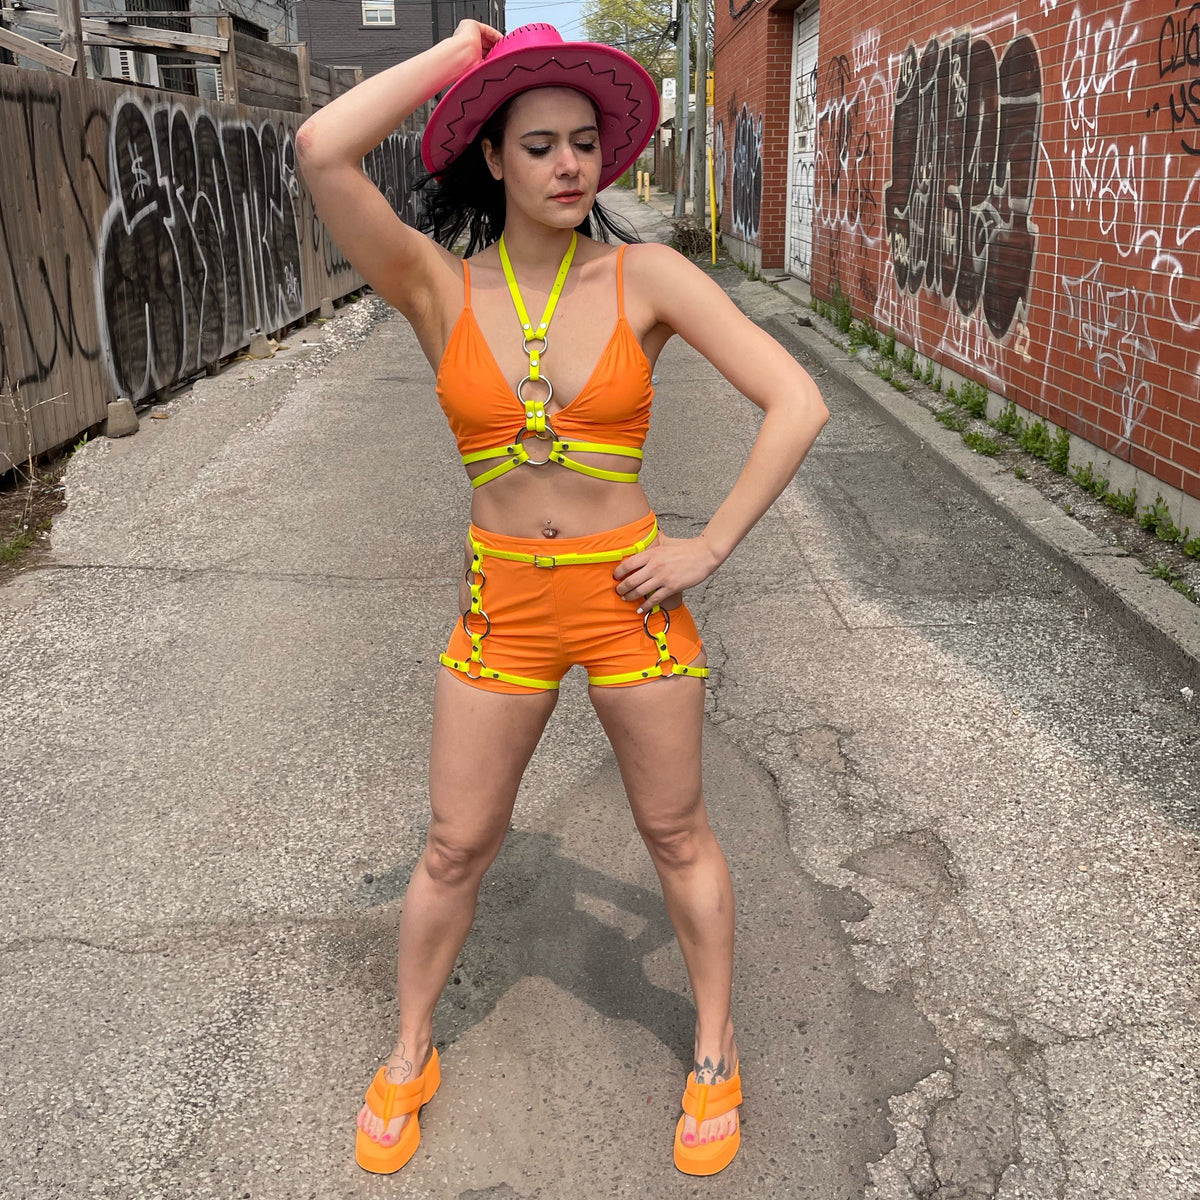 Woman wearing a orange outfit and a yellow sexy womens harness.